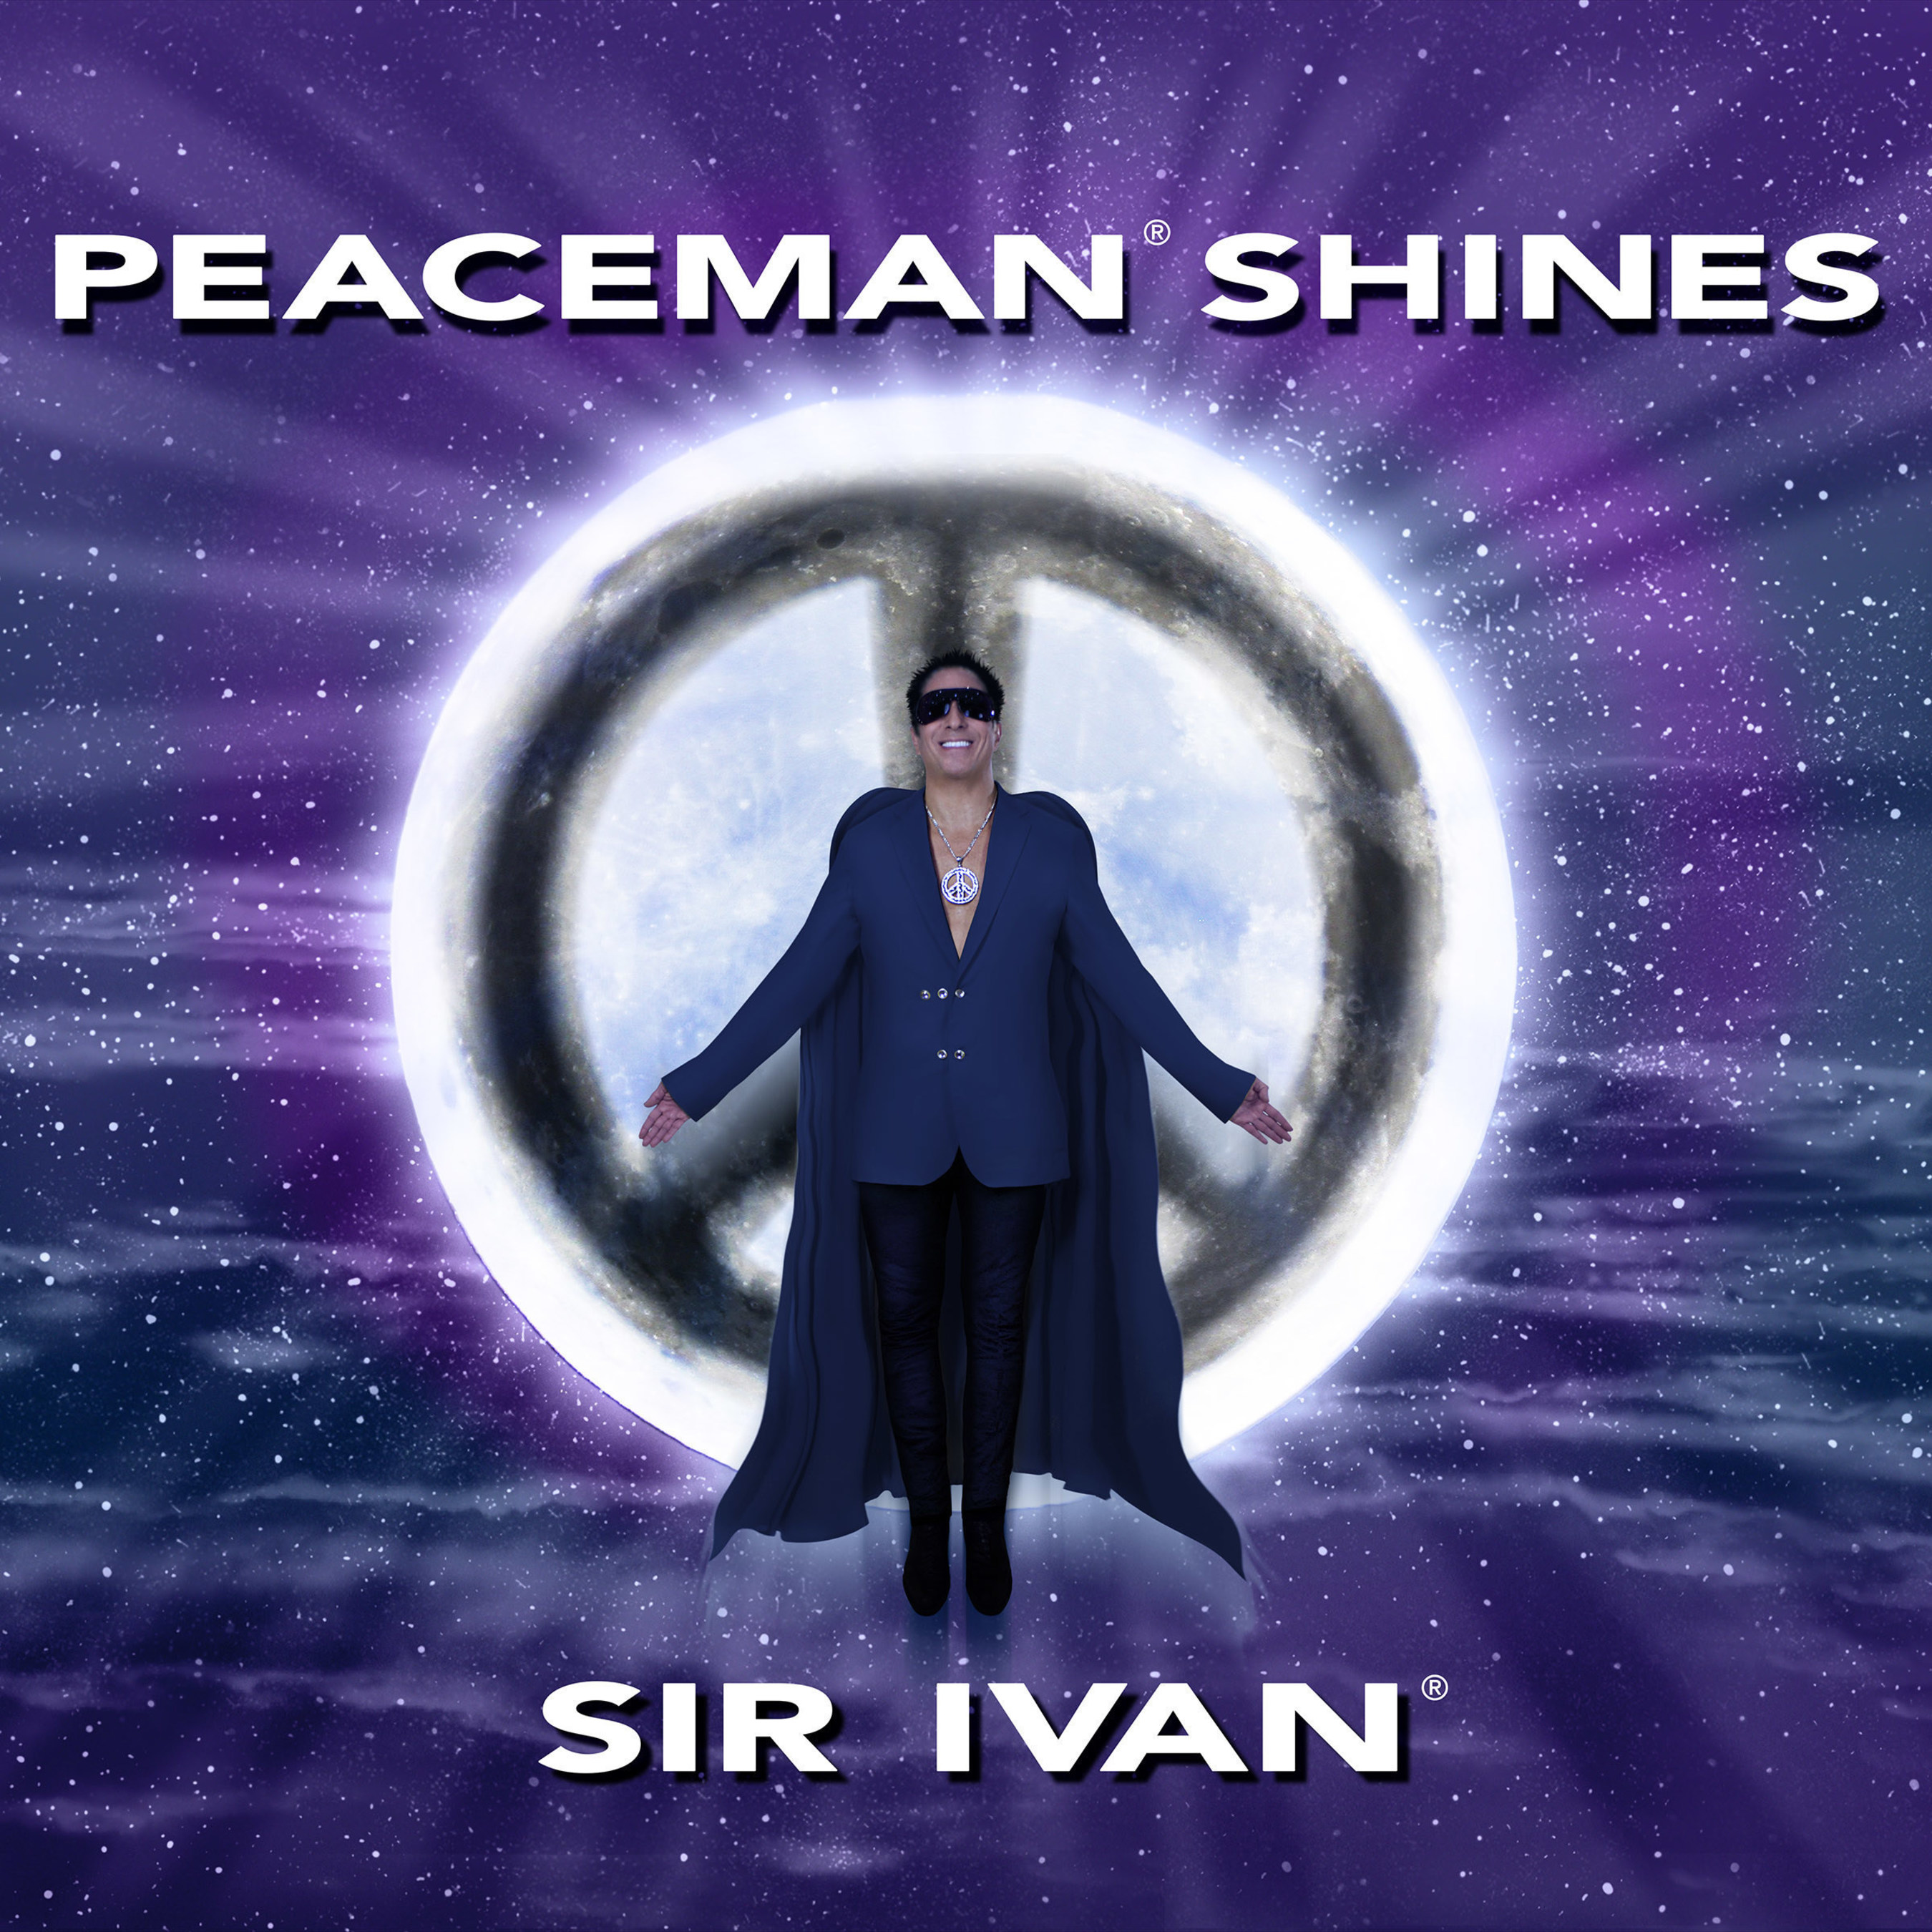 Cover Art for Sir Ivan's New Album "Peaceman Shines"